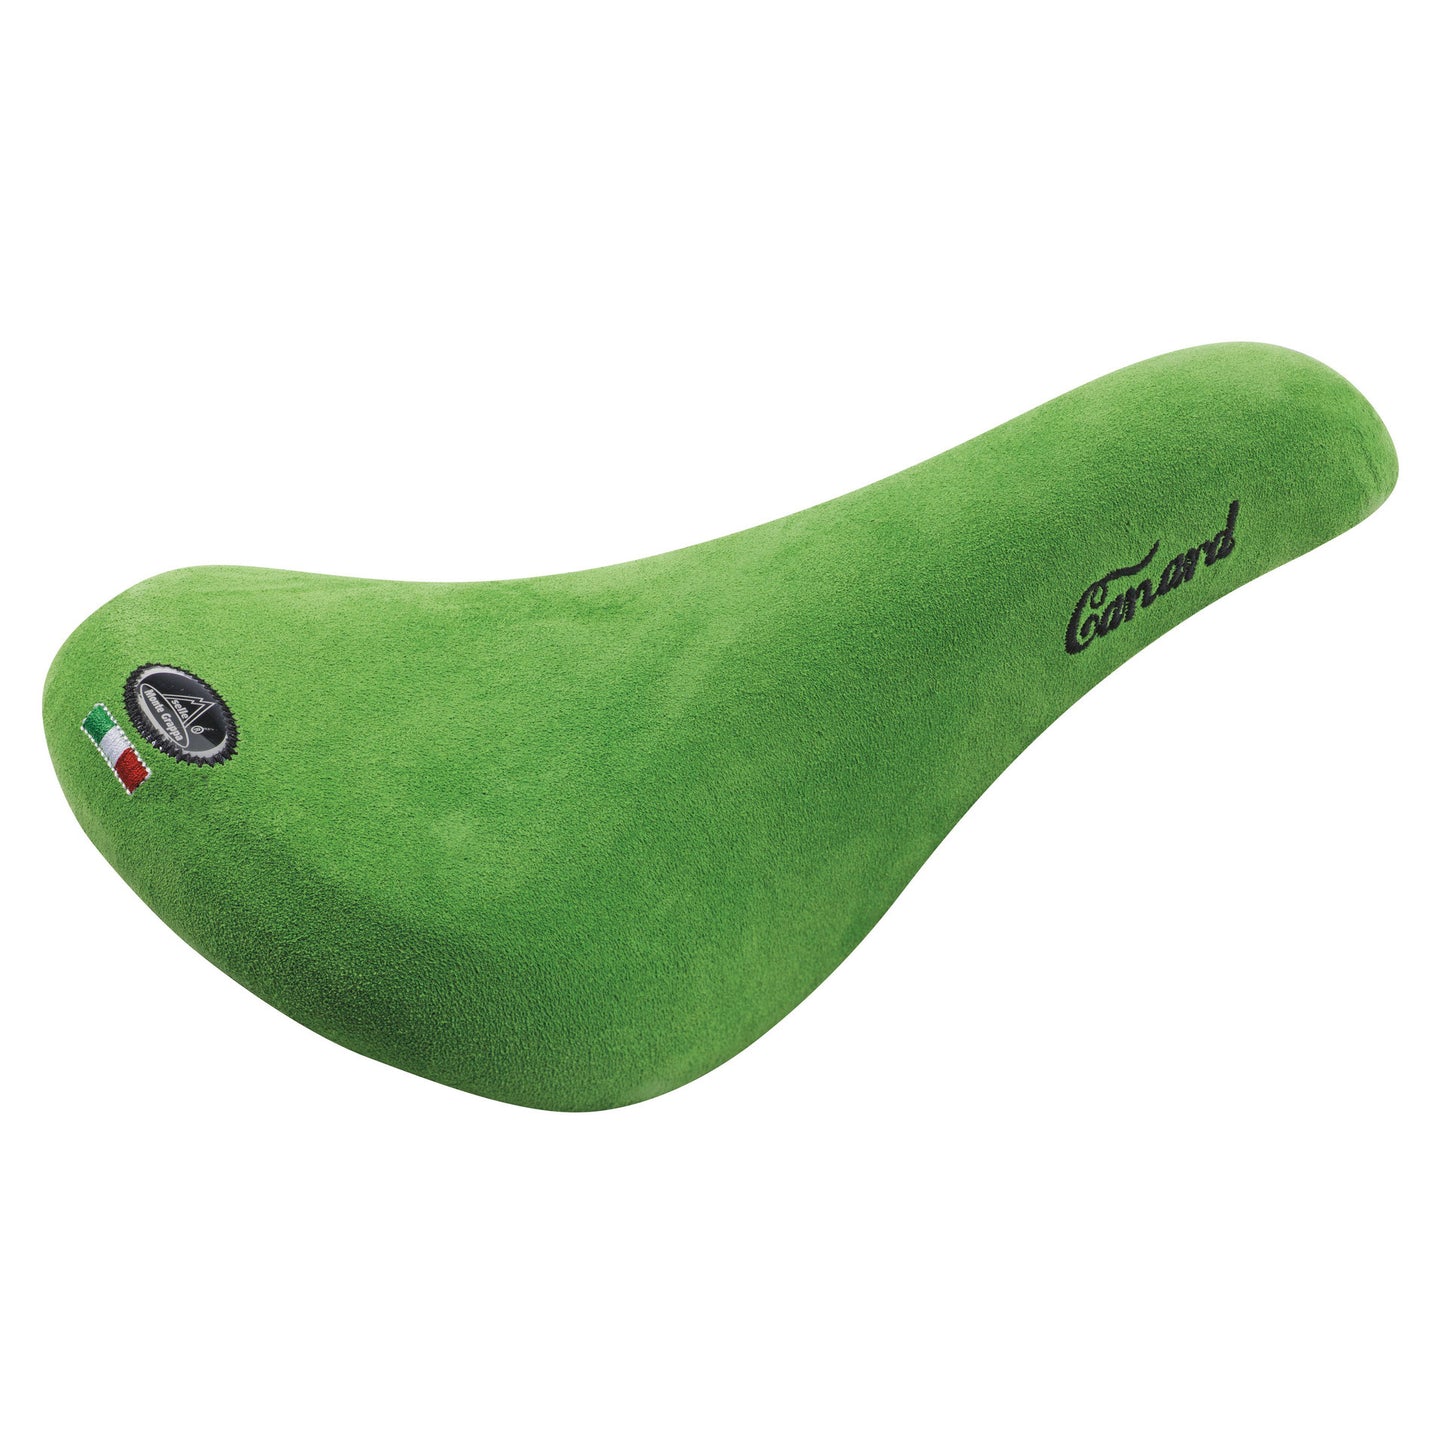 Monte Grappa Saddle Canard Leather Green